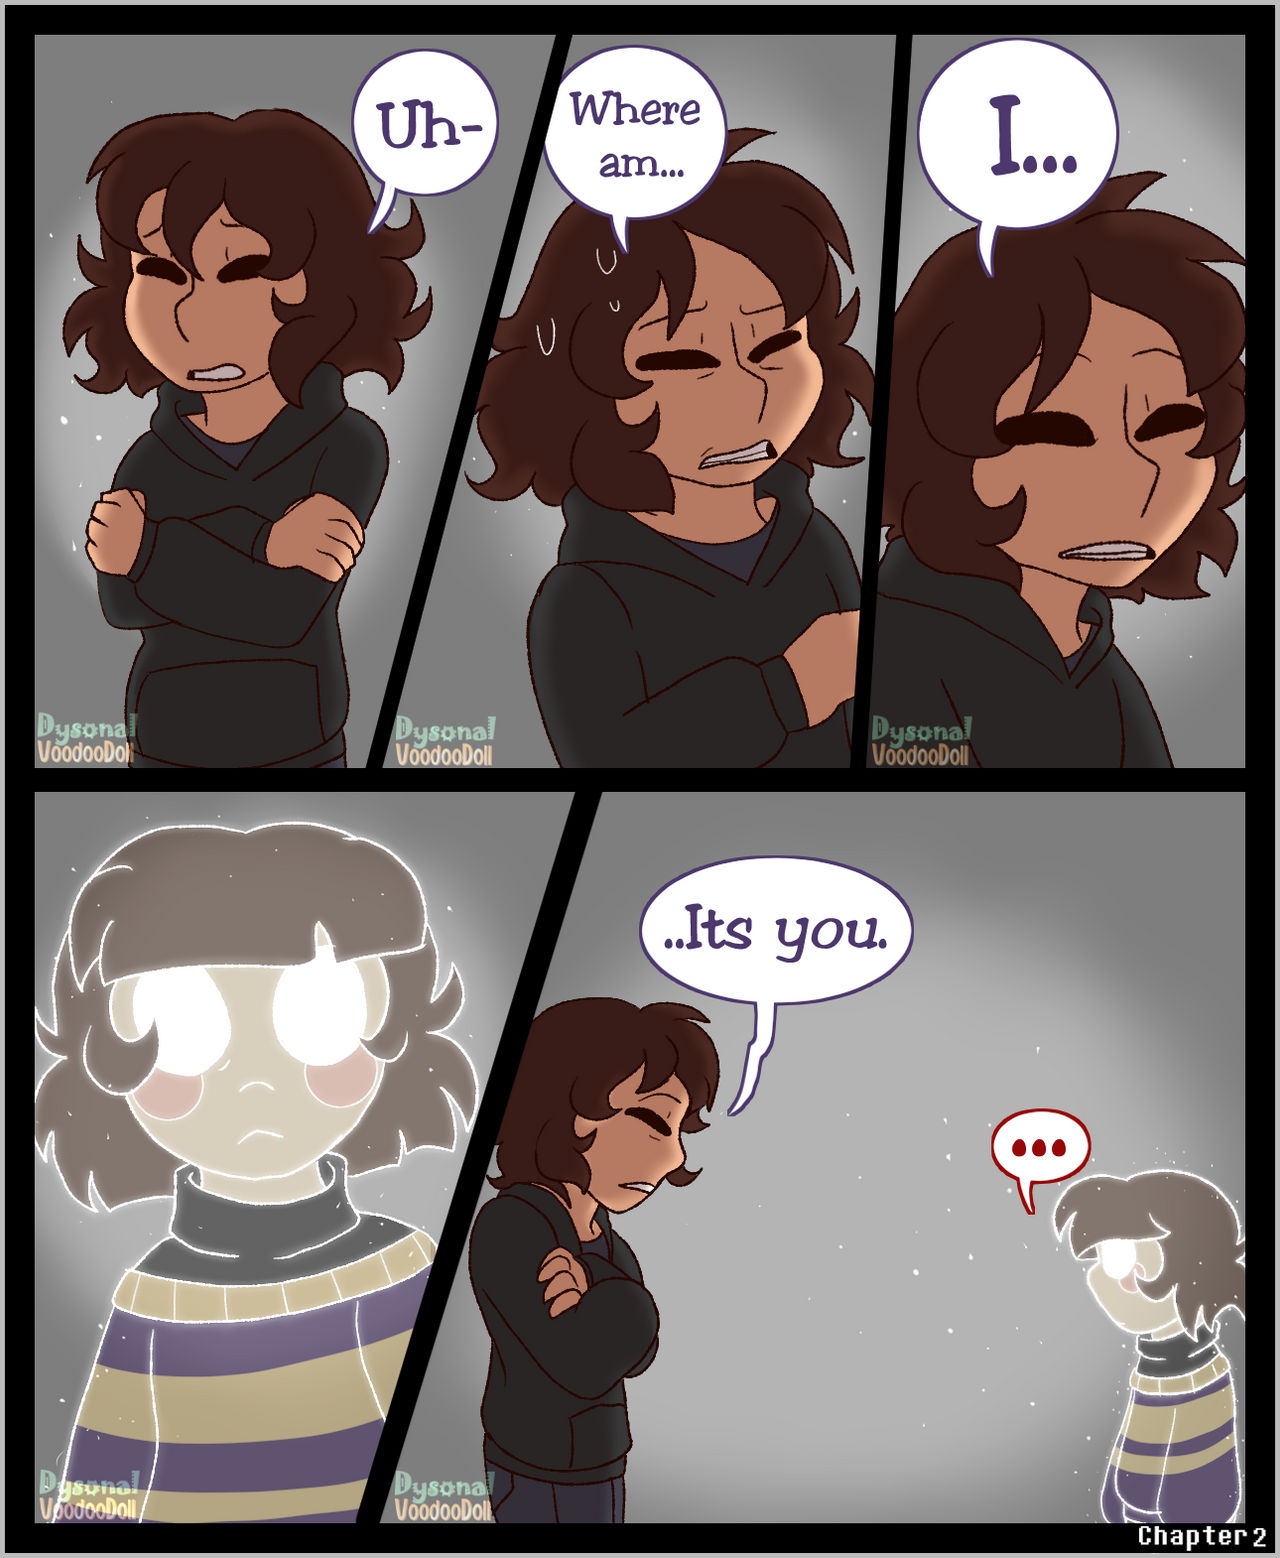 Illusiontale - CH2 Page 2 by DysonalArt on DeviantArt